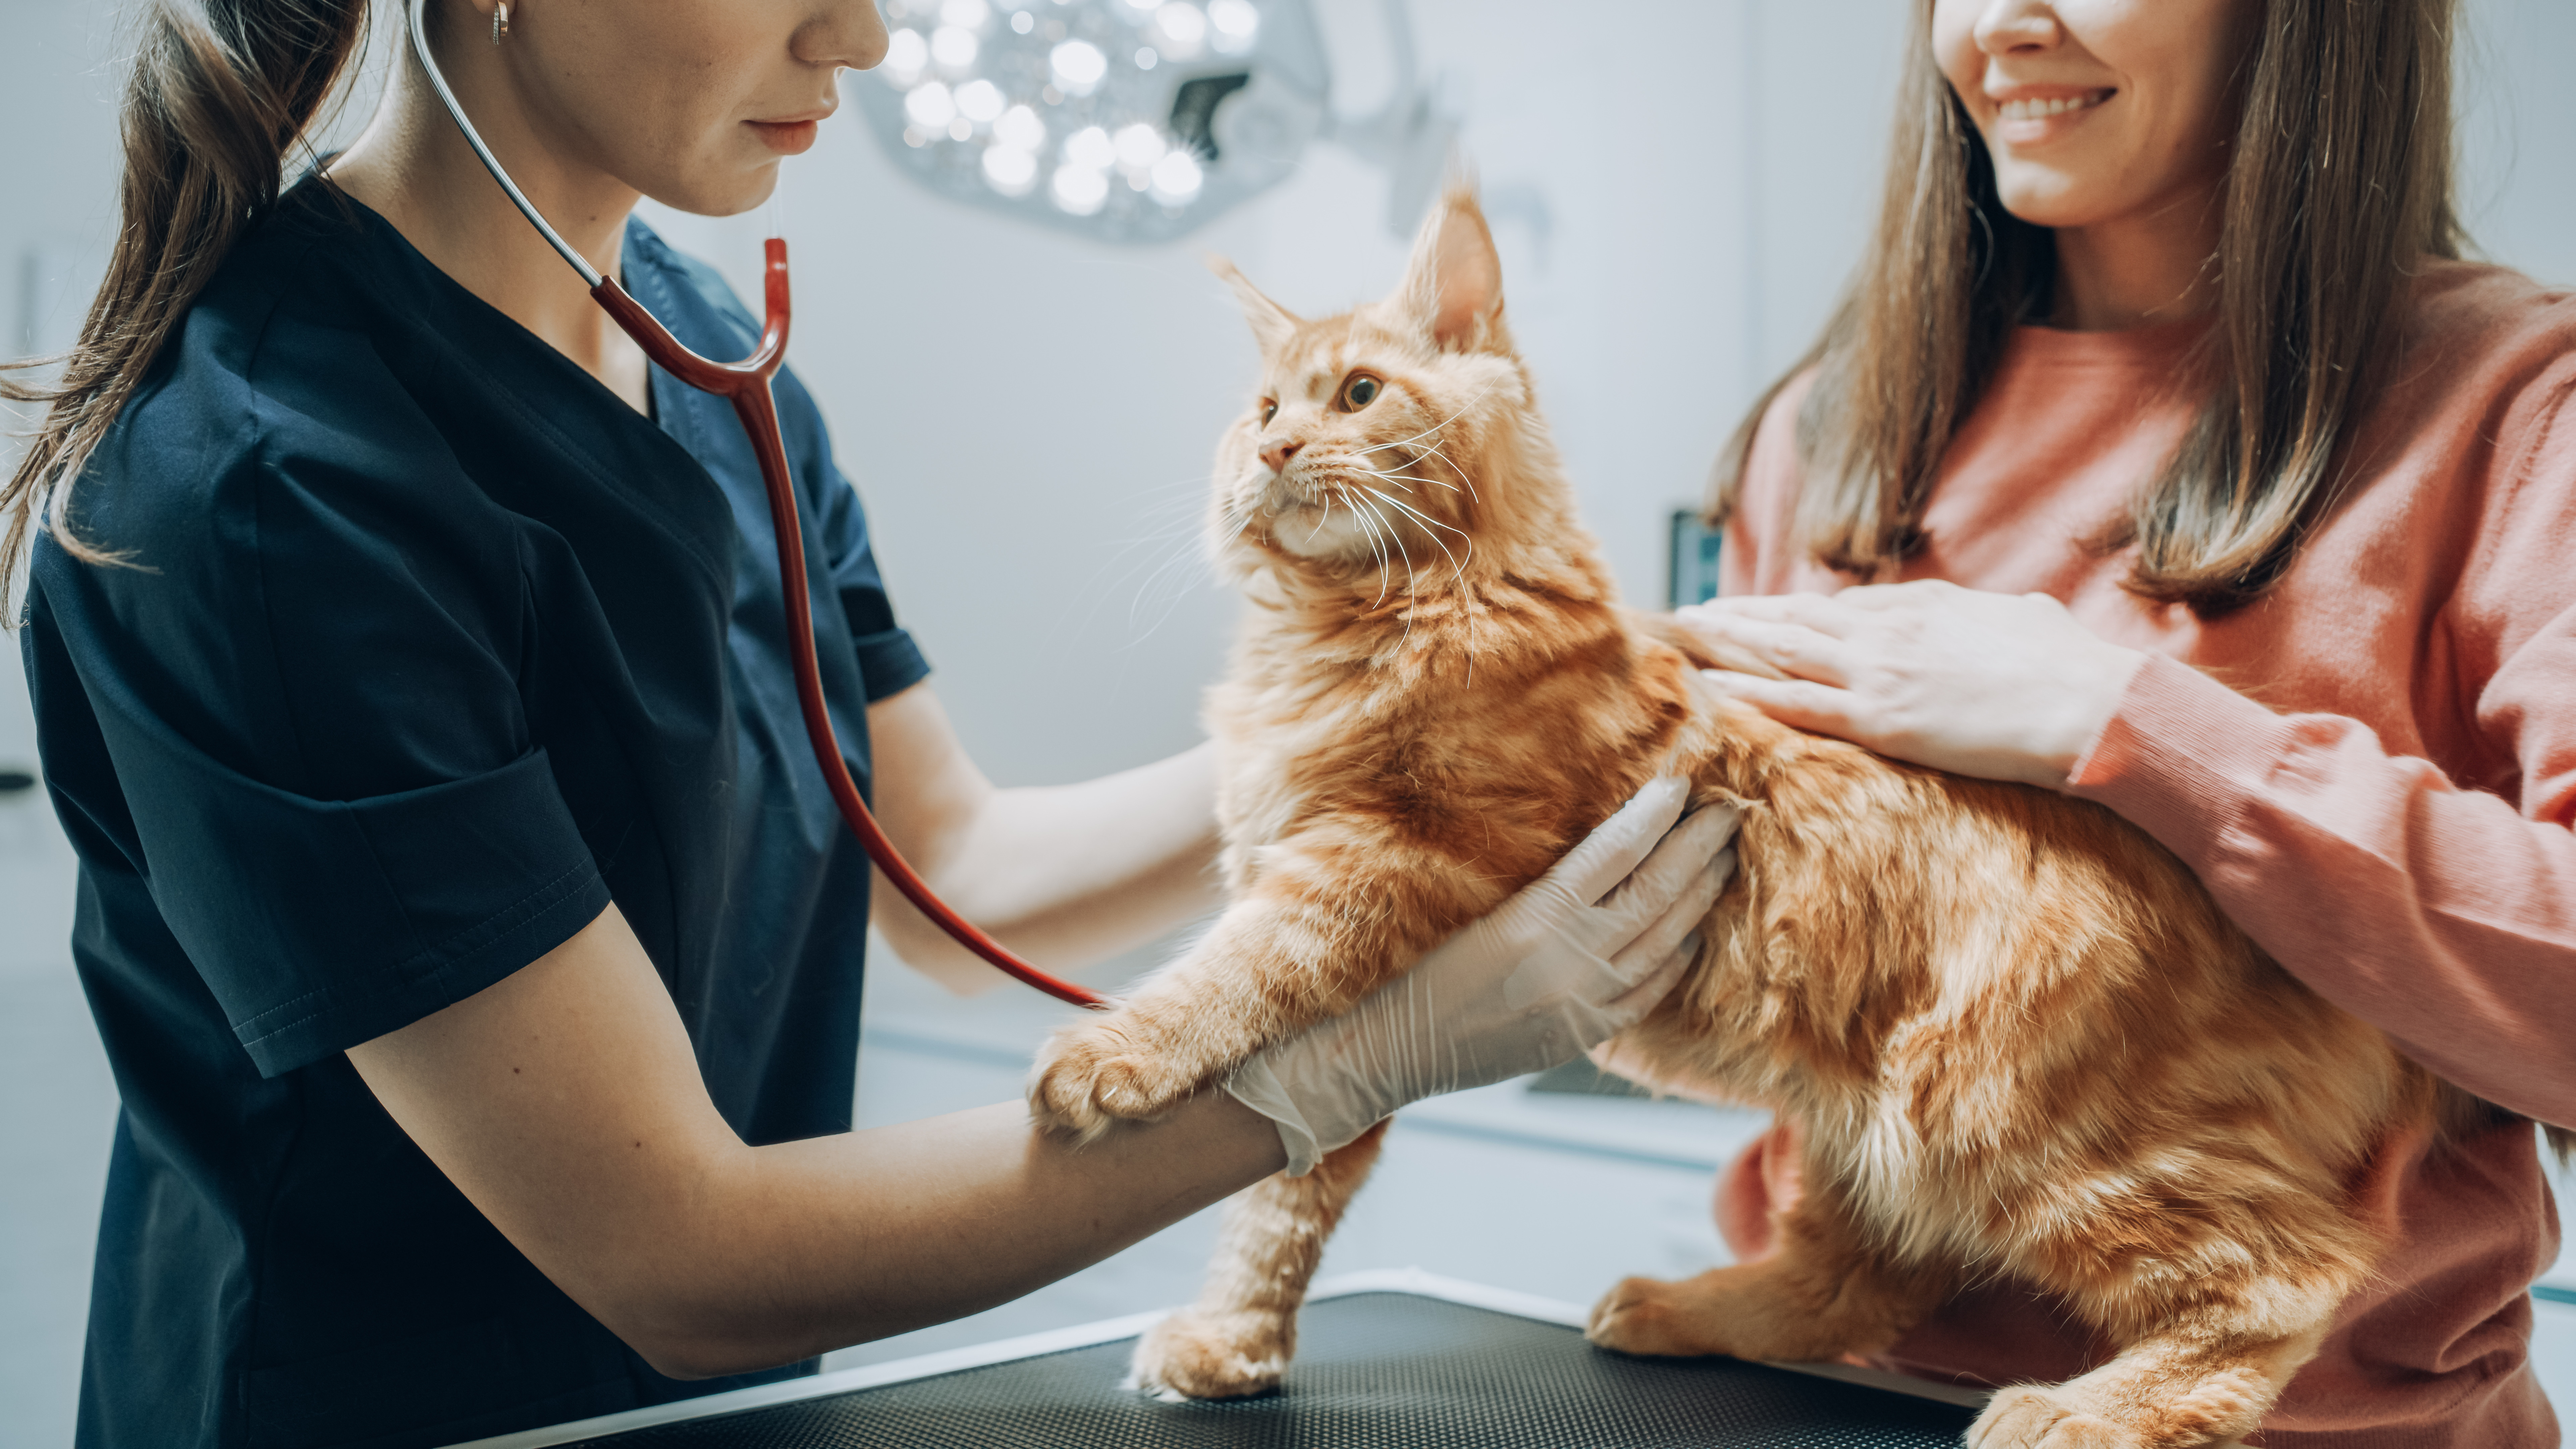 Veterinarian Using Stethoscope to Examine Breathing of a Pet Maine Coon Lying on a Check Up Table. Young Beautiful Cat Mom Holding and Petting the Kitten